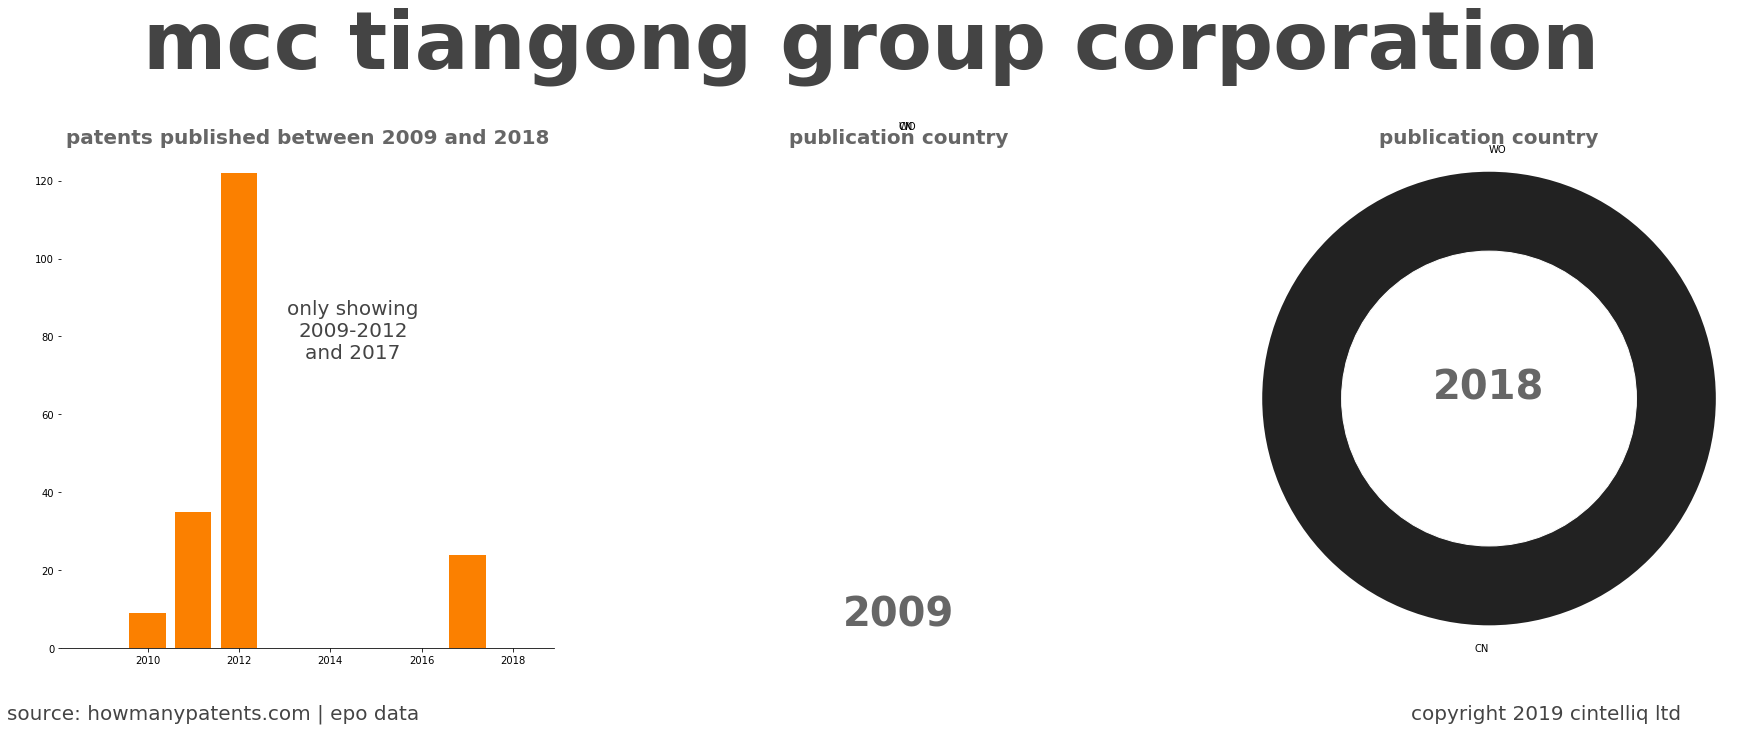 summary of patents for Mcc Tiangong Group Corporation